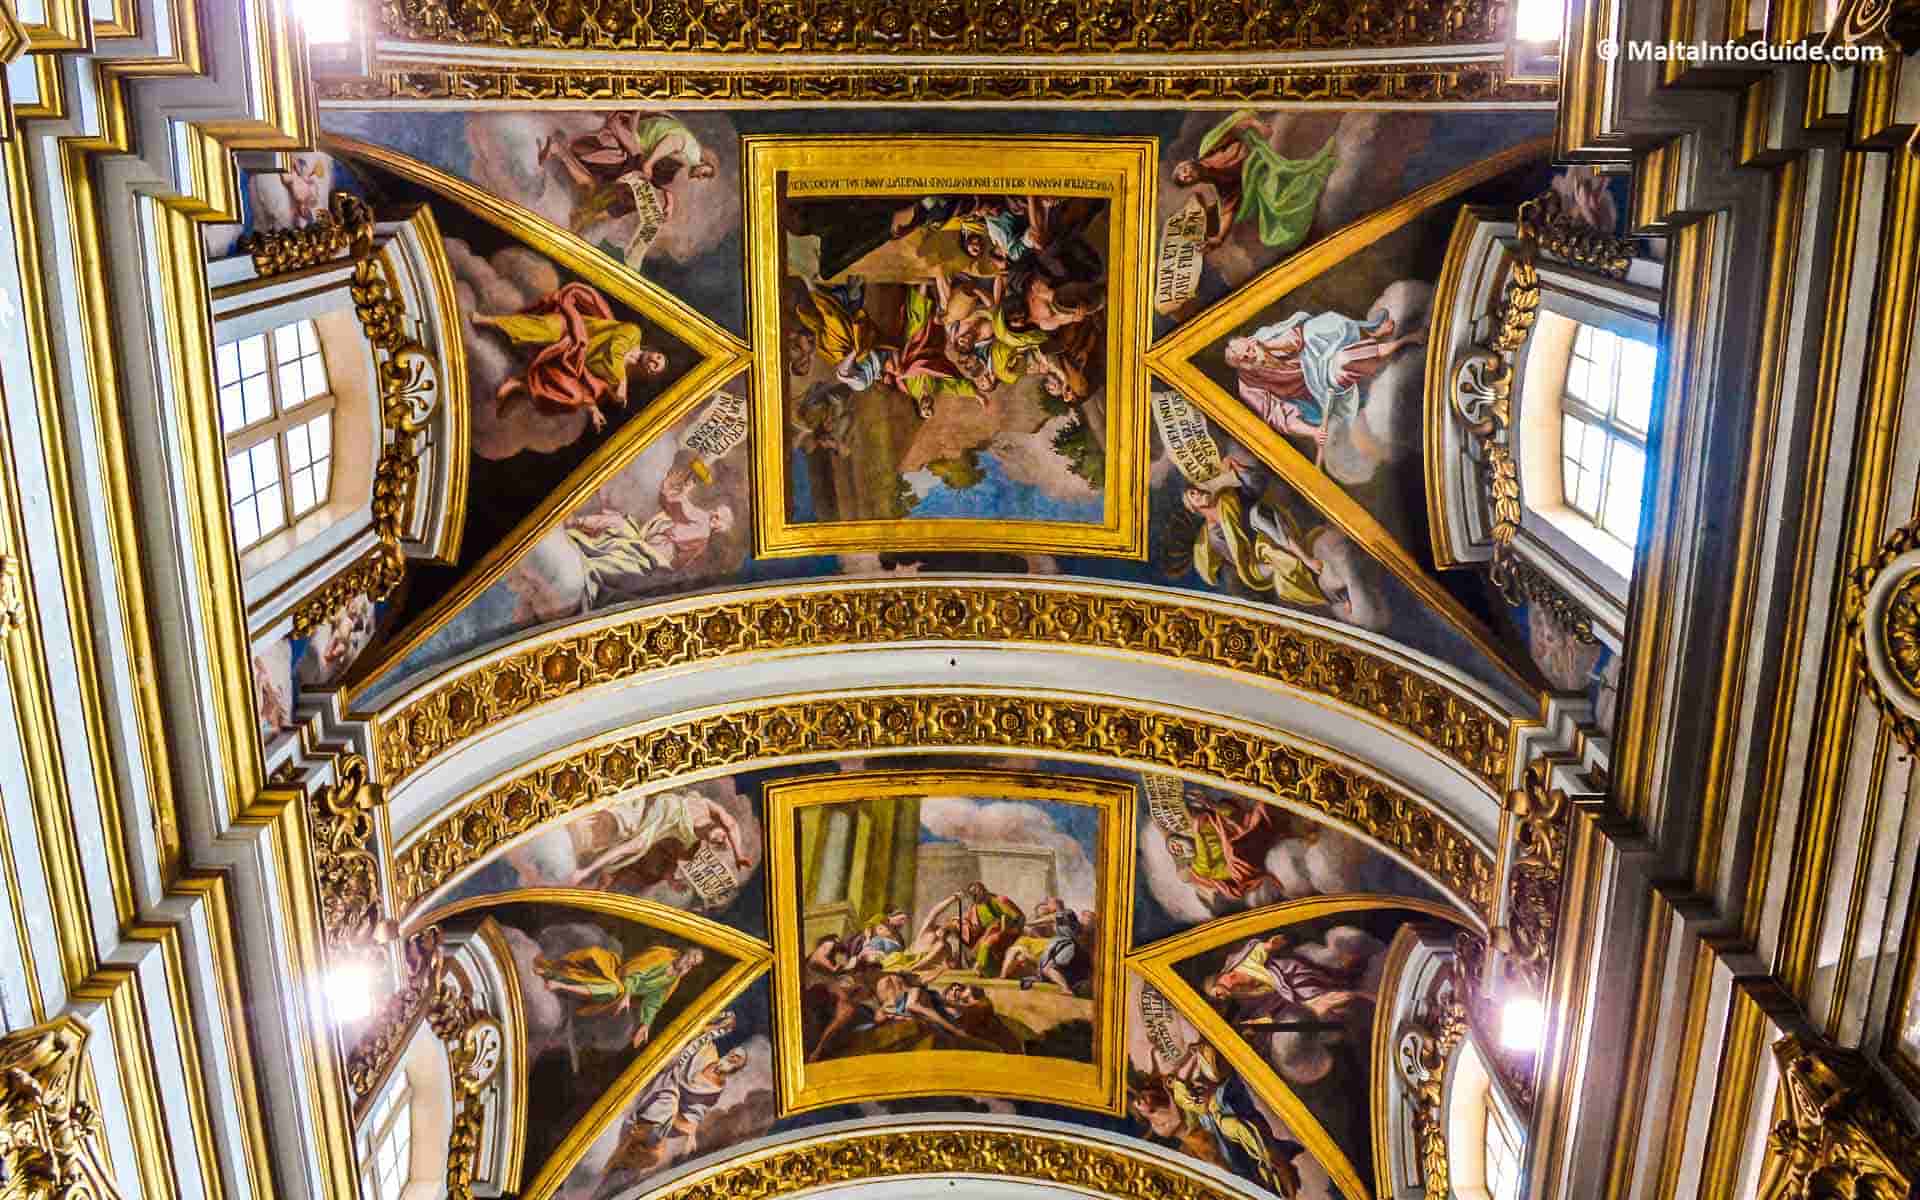 The paintings on the ceiling at St. Paul's Cathedral Mdina